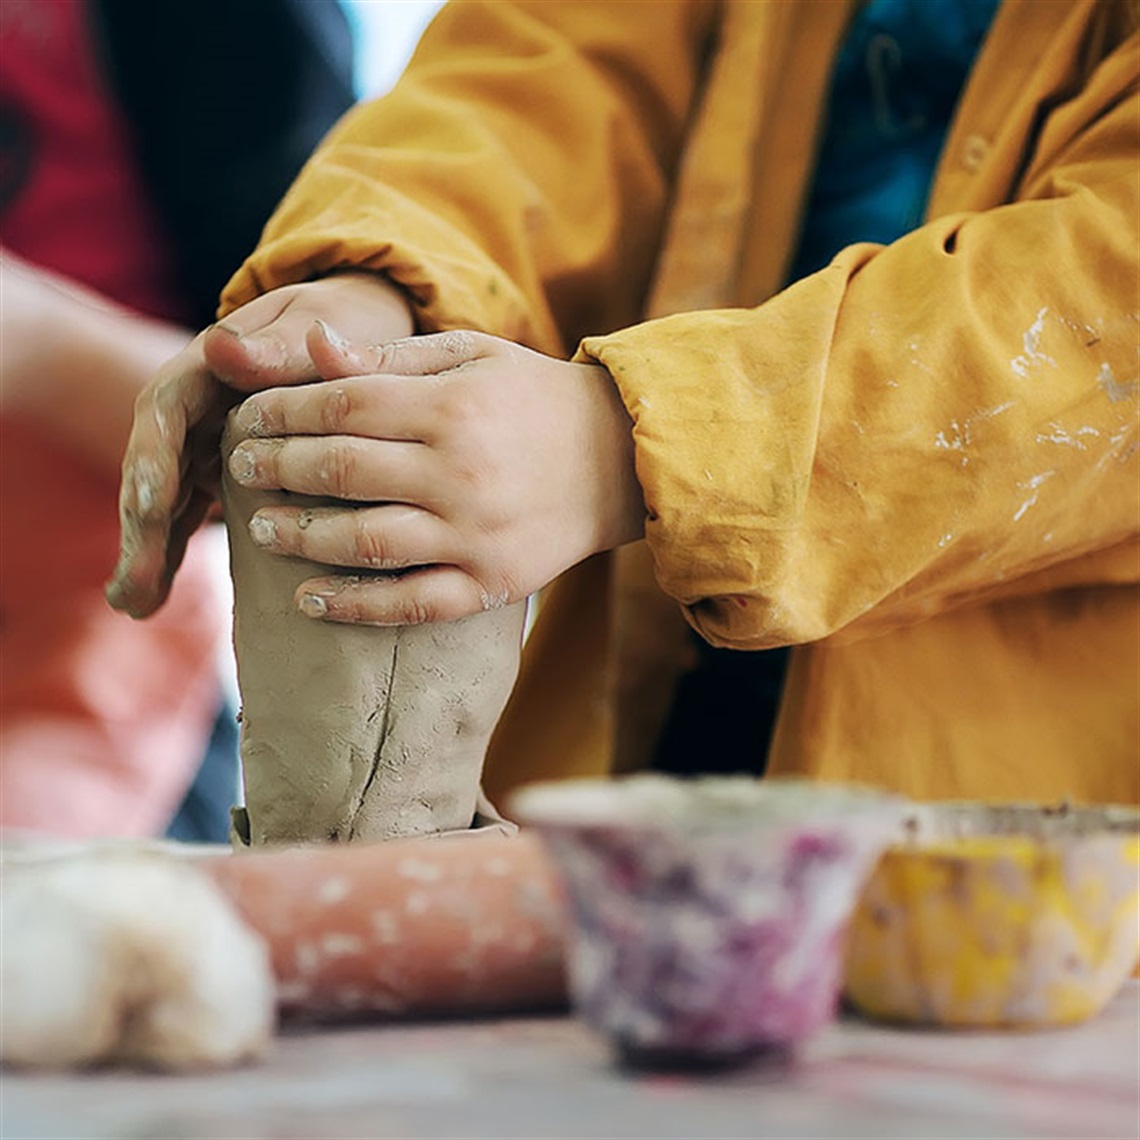 Young child using their hands to shape and smooth a block of clay